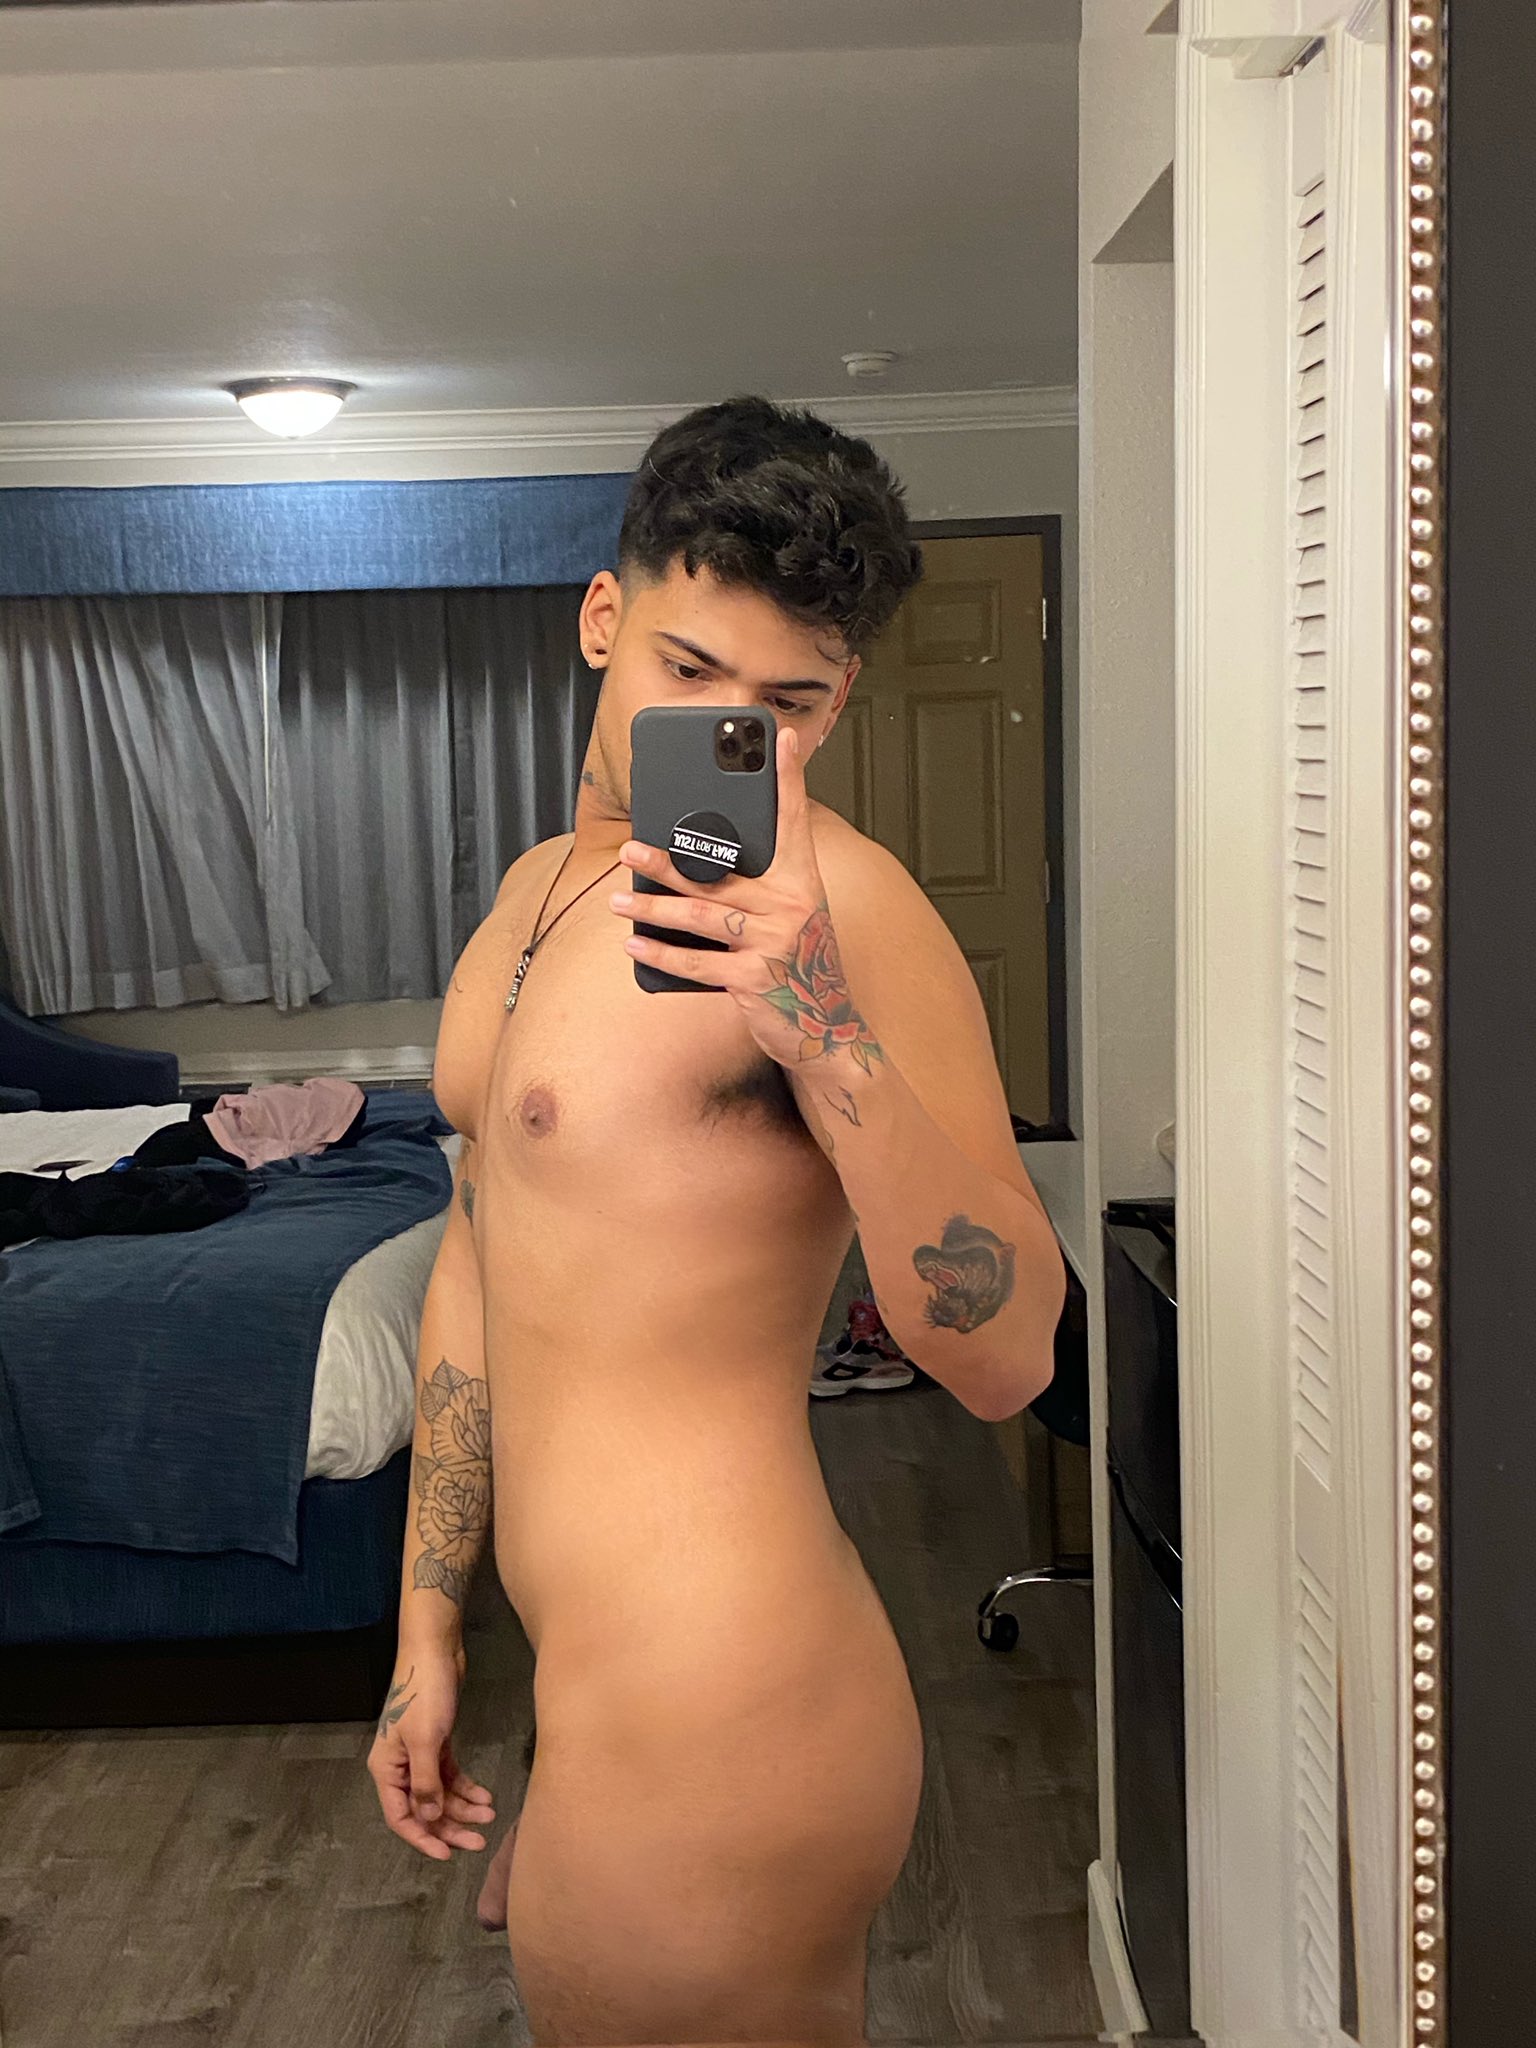 3 pic. My BIGGEST ONLYFANS DISCOUNT EVER! Only $4

70% off for 30 days✨

https://t.co/GLhMBnqOc1 https://t